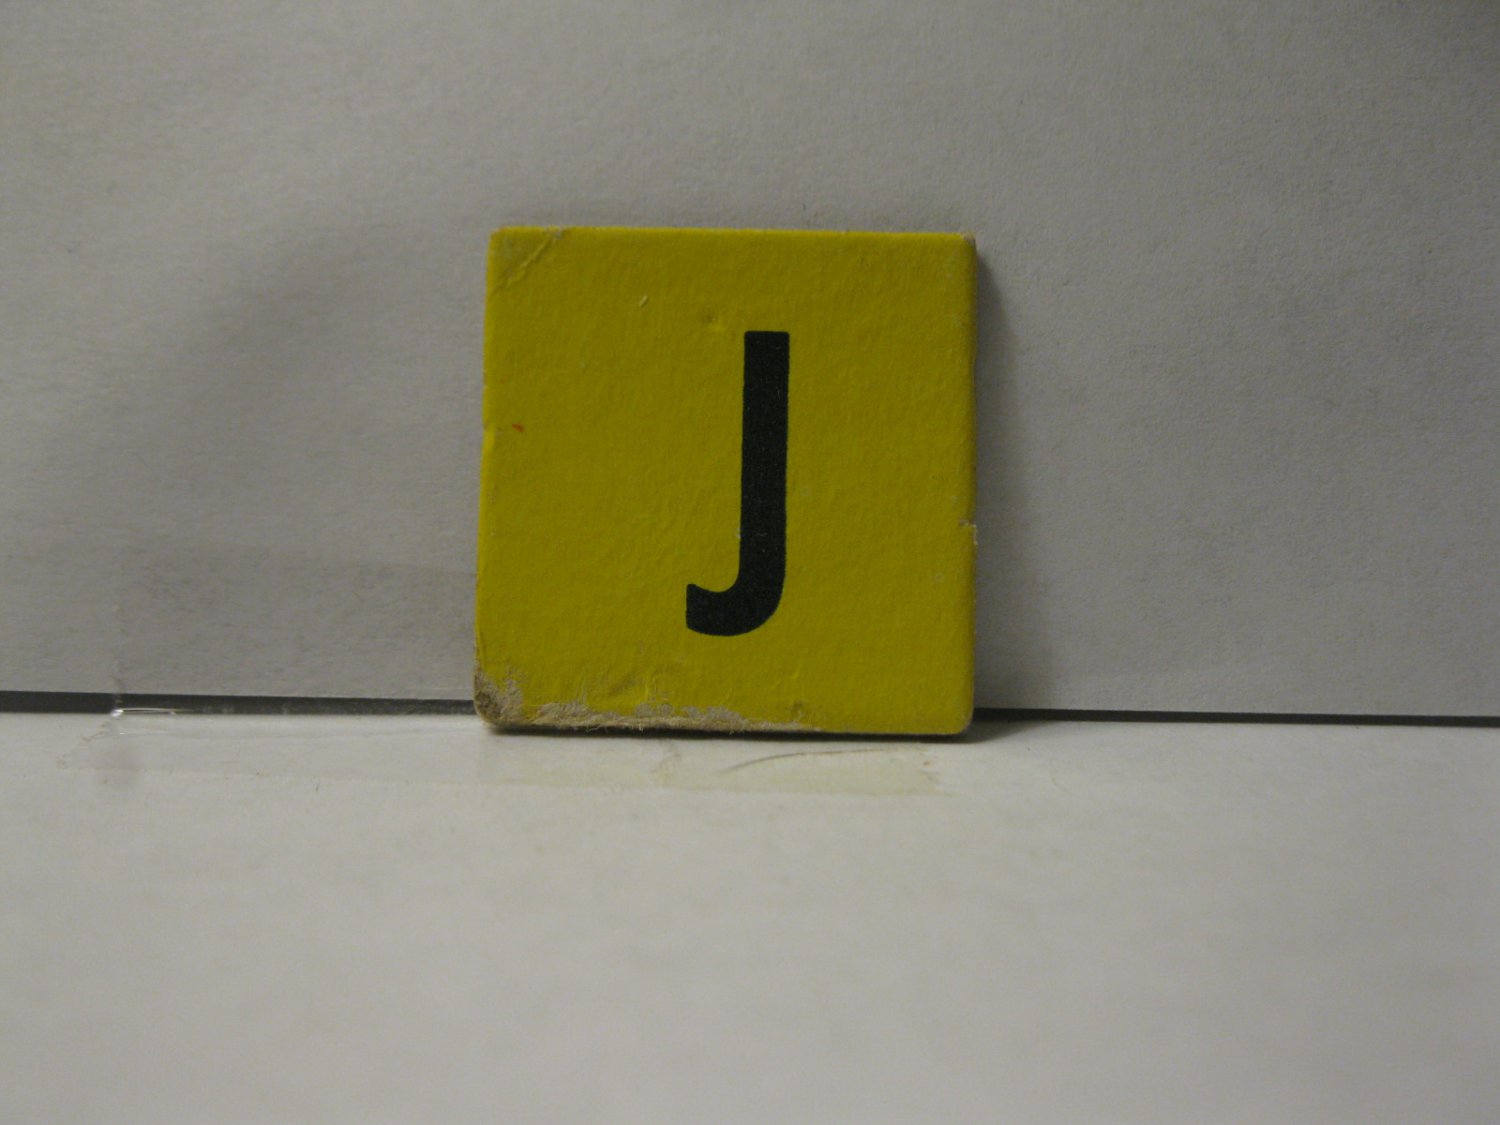 1958 Scrabble for Juniors Board Game Piece: Letter Tab - J